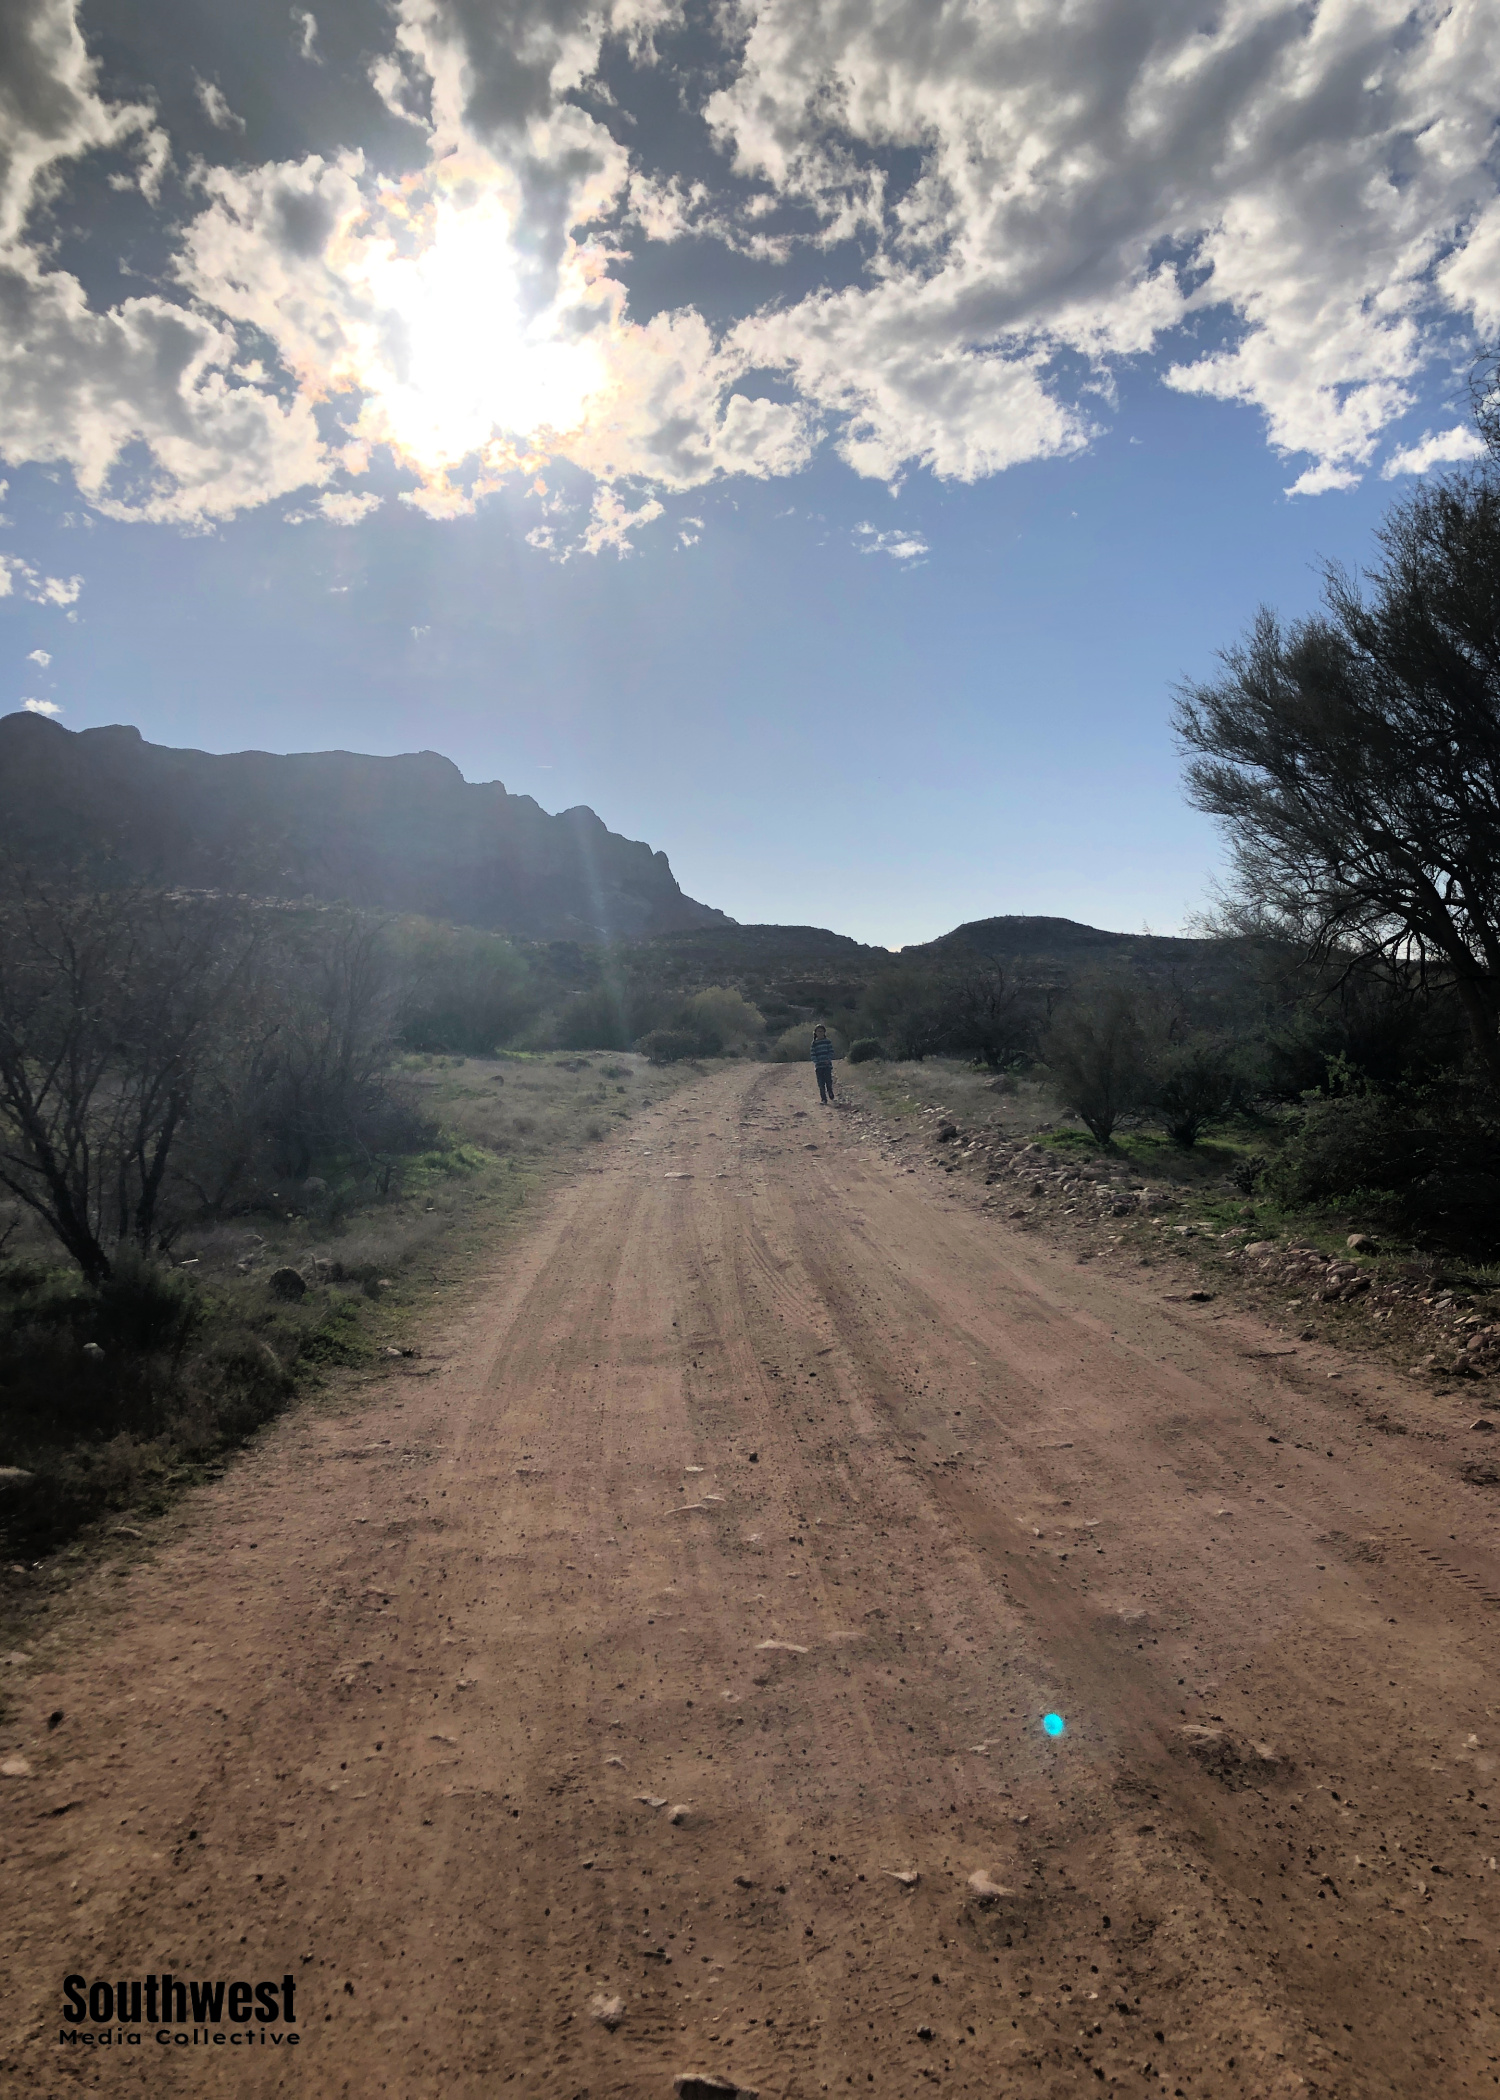 Do some Apache Tears Mining in Superior, Arizona on this beautiful family-friendly trail - here are some tips to help you uncover some beautiful obsidian!